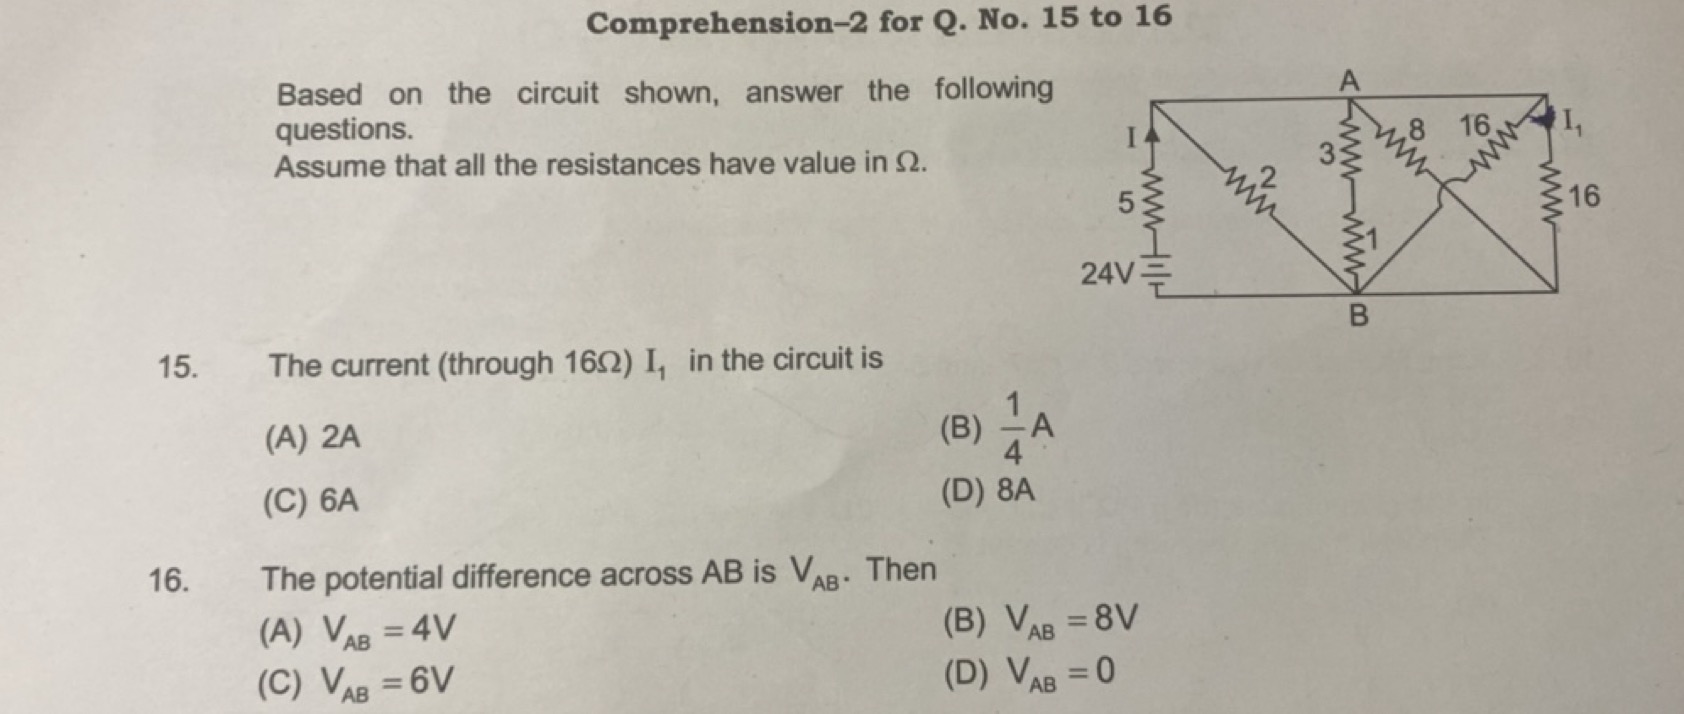 Comprehension-2 for Q. No. 15 to 16 Based on the circuit shown, answer